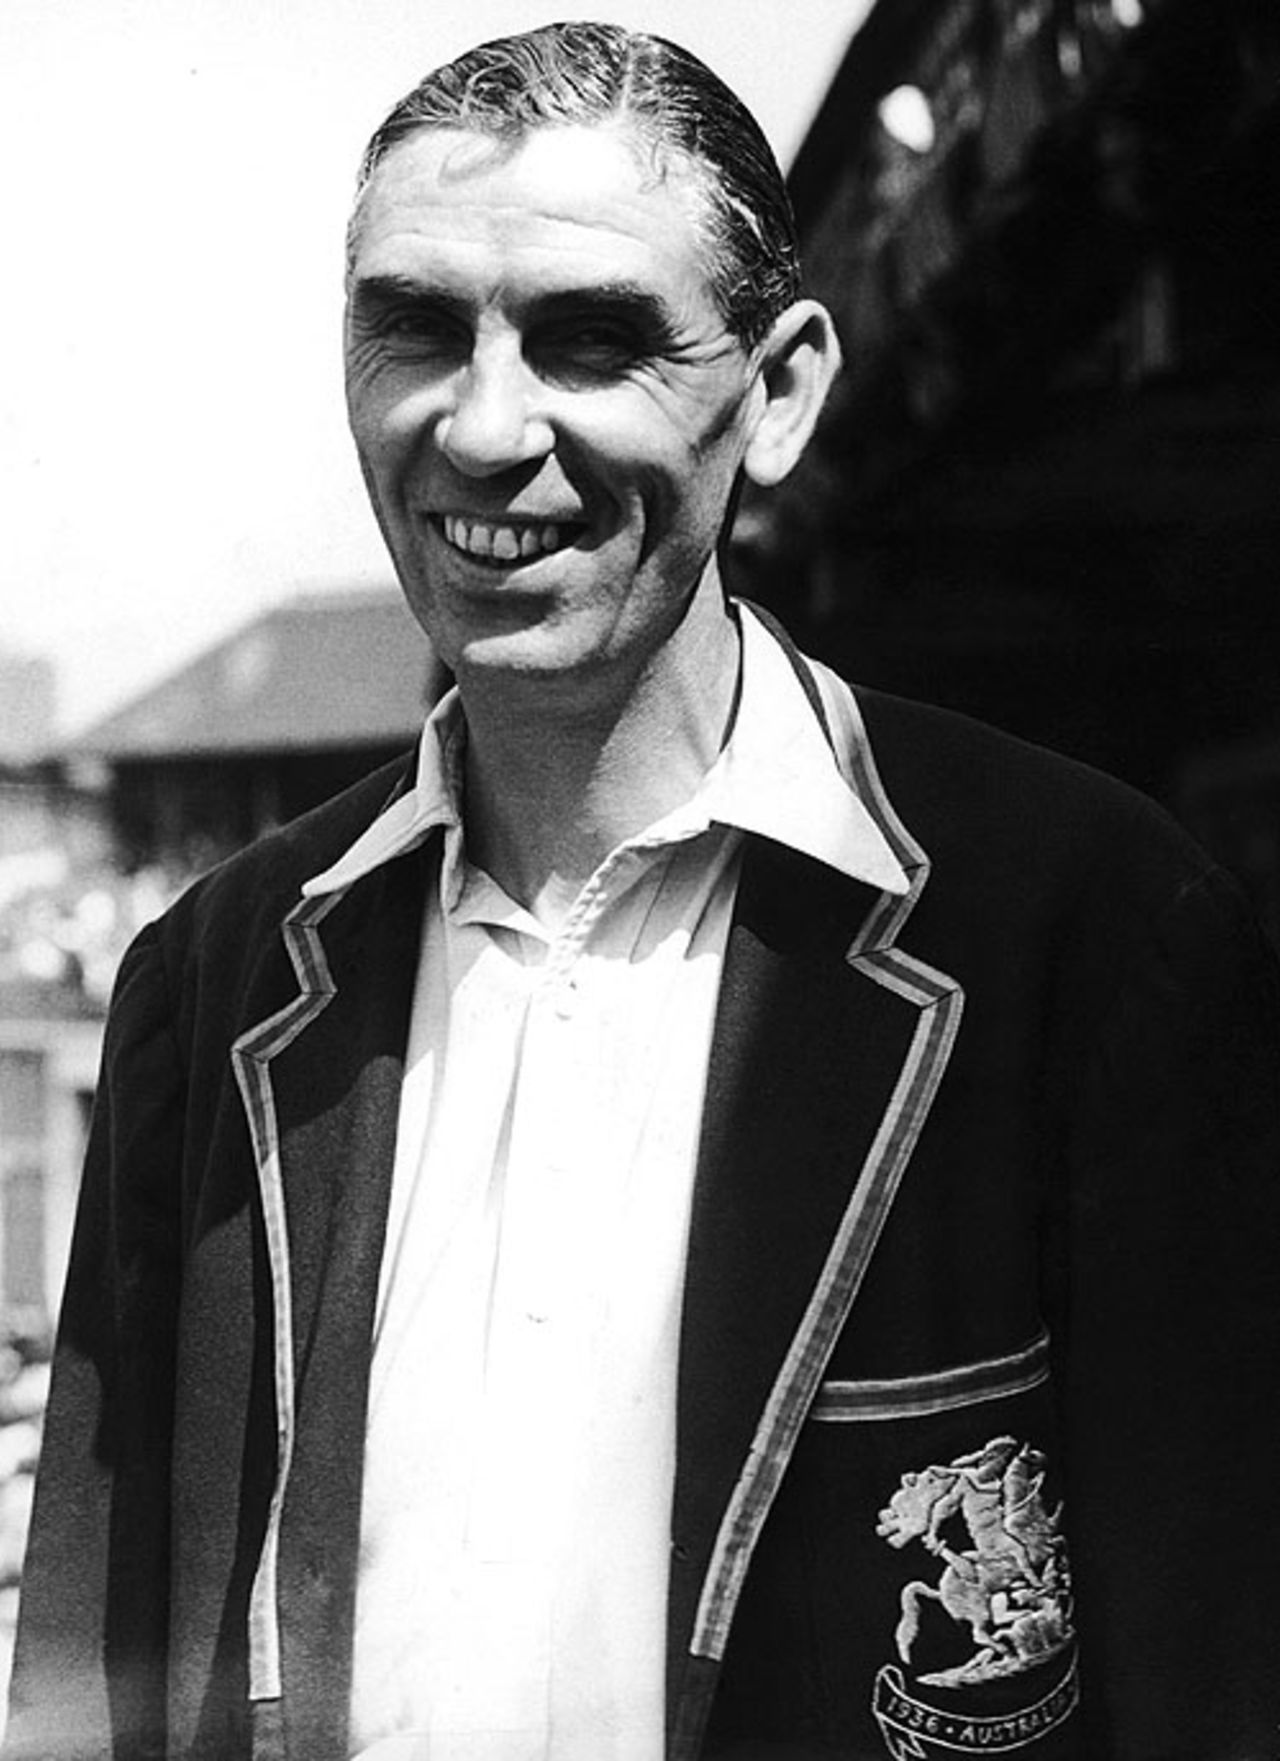 Jim Sims, the Middlesex cricketer